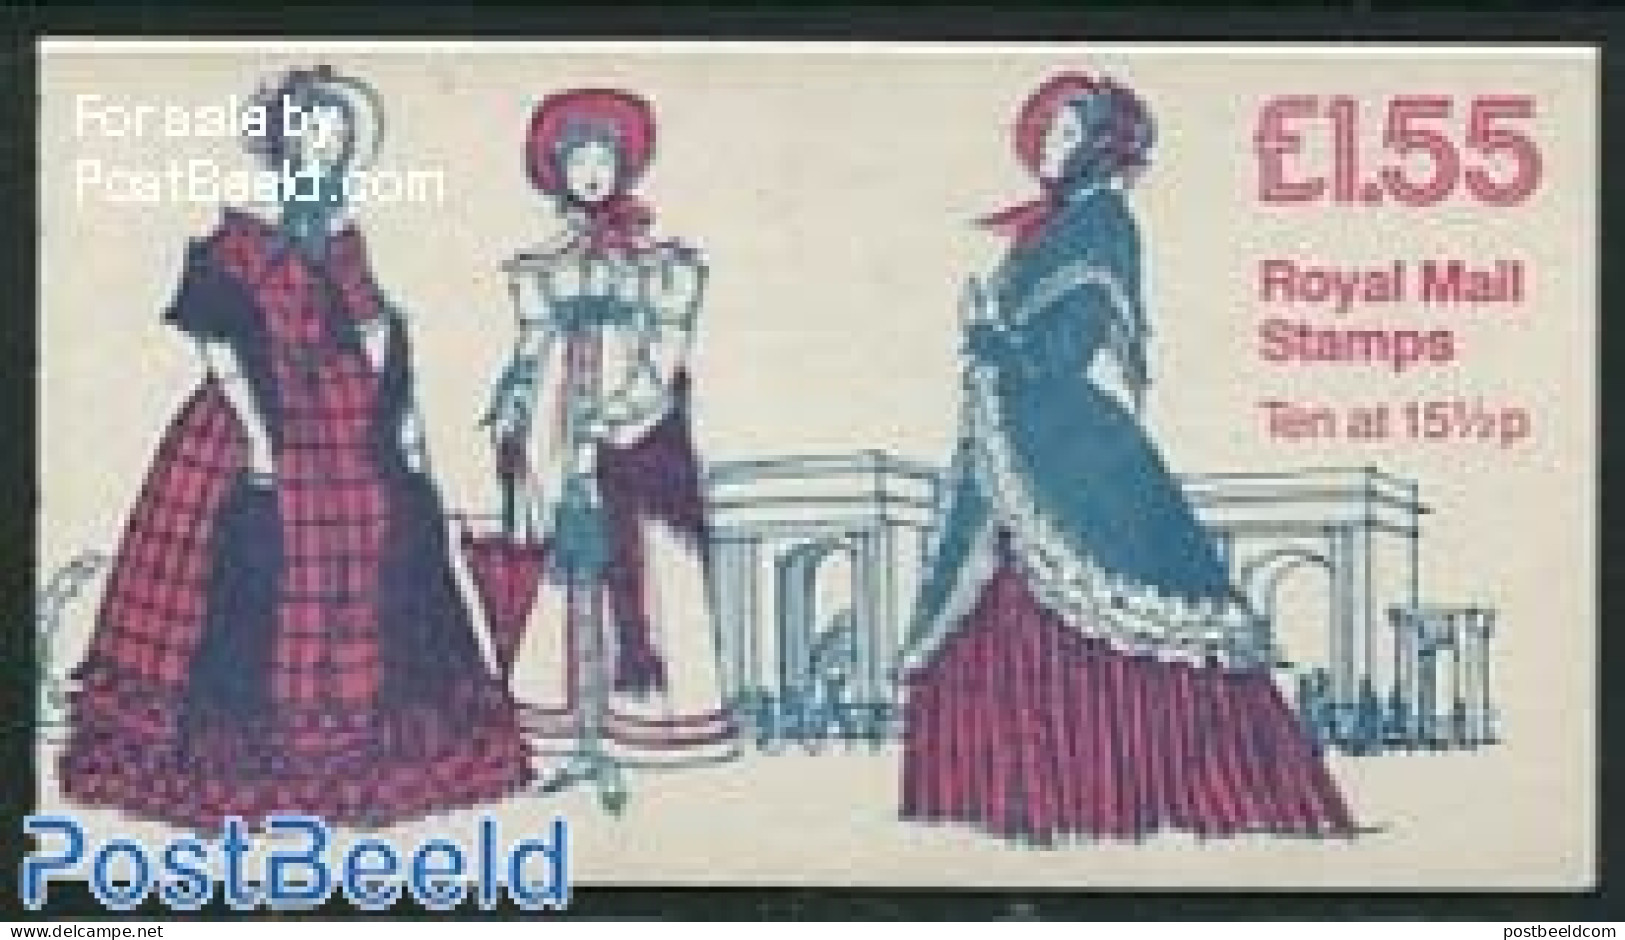 Great Britain 1982 Def. Booklet, Fashion 1830-1850, Selvedge At Left, Mint NH, Stamp Booklets - Art - Fashion - Unused Stamps